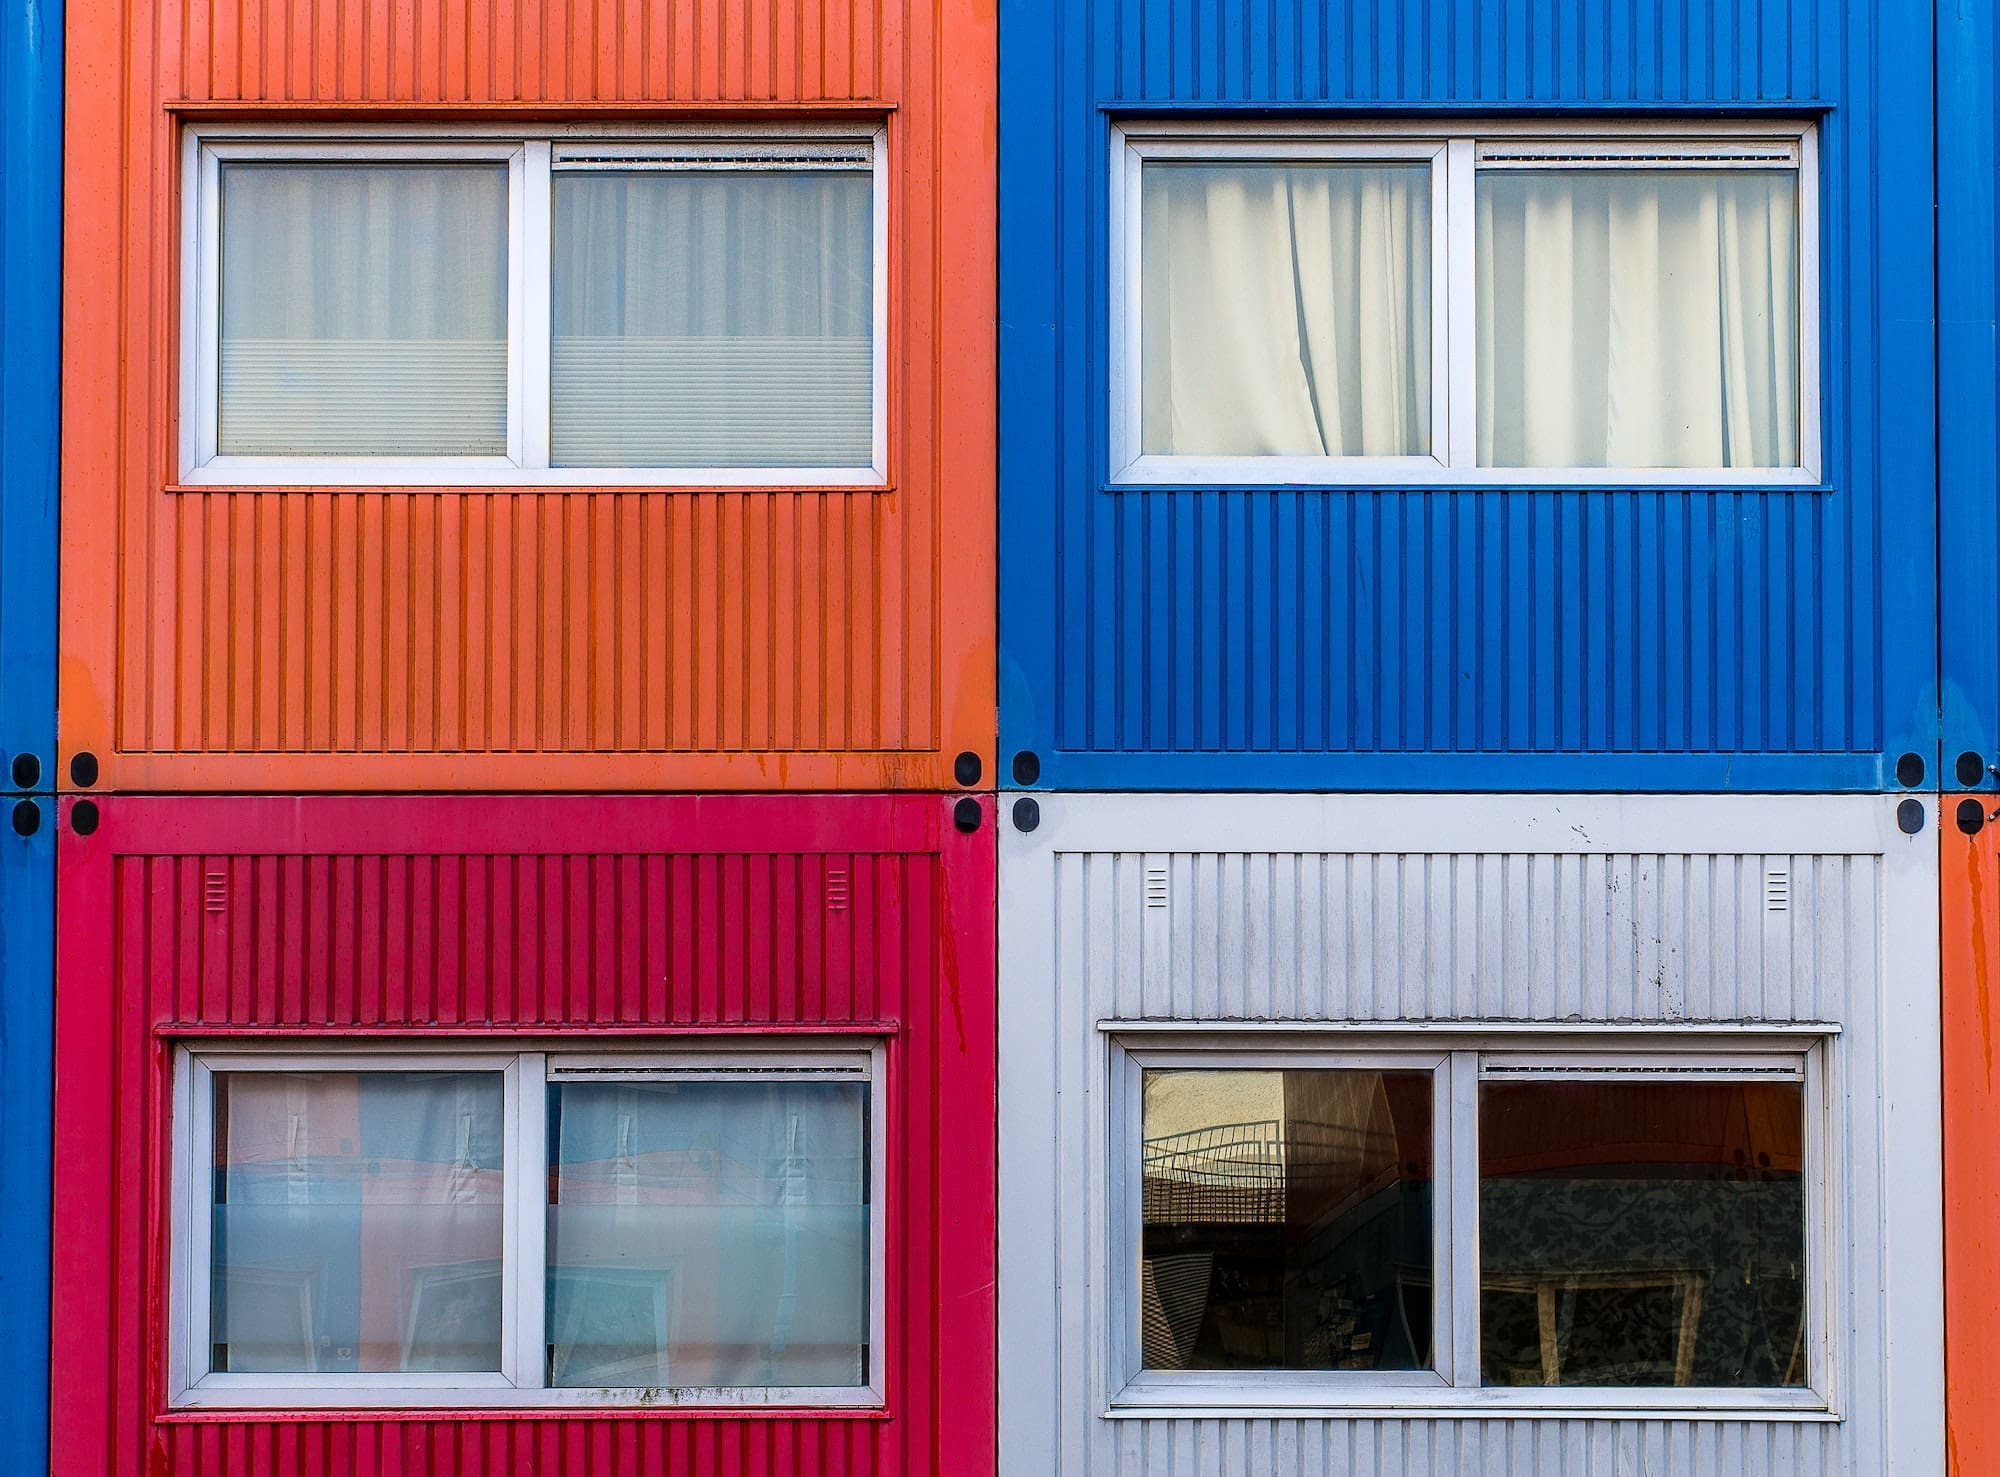 Residential building with temporary container homes for students or refugees